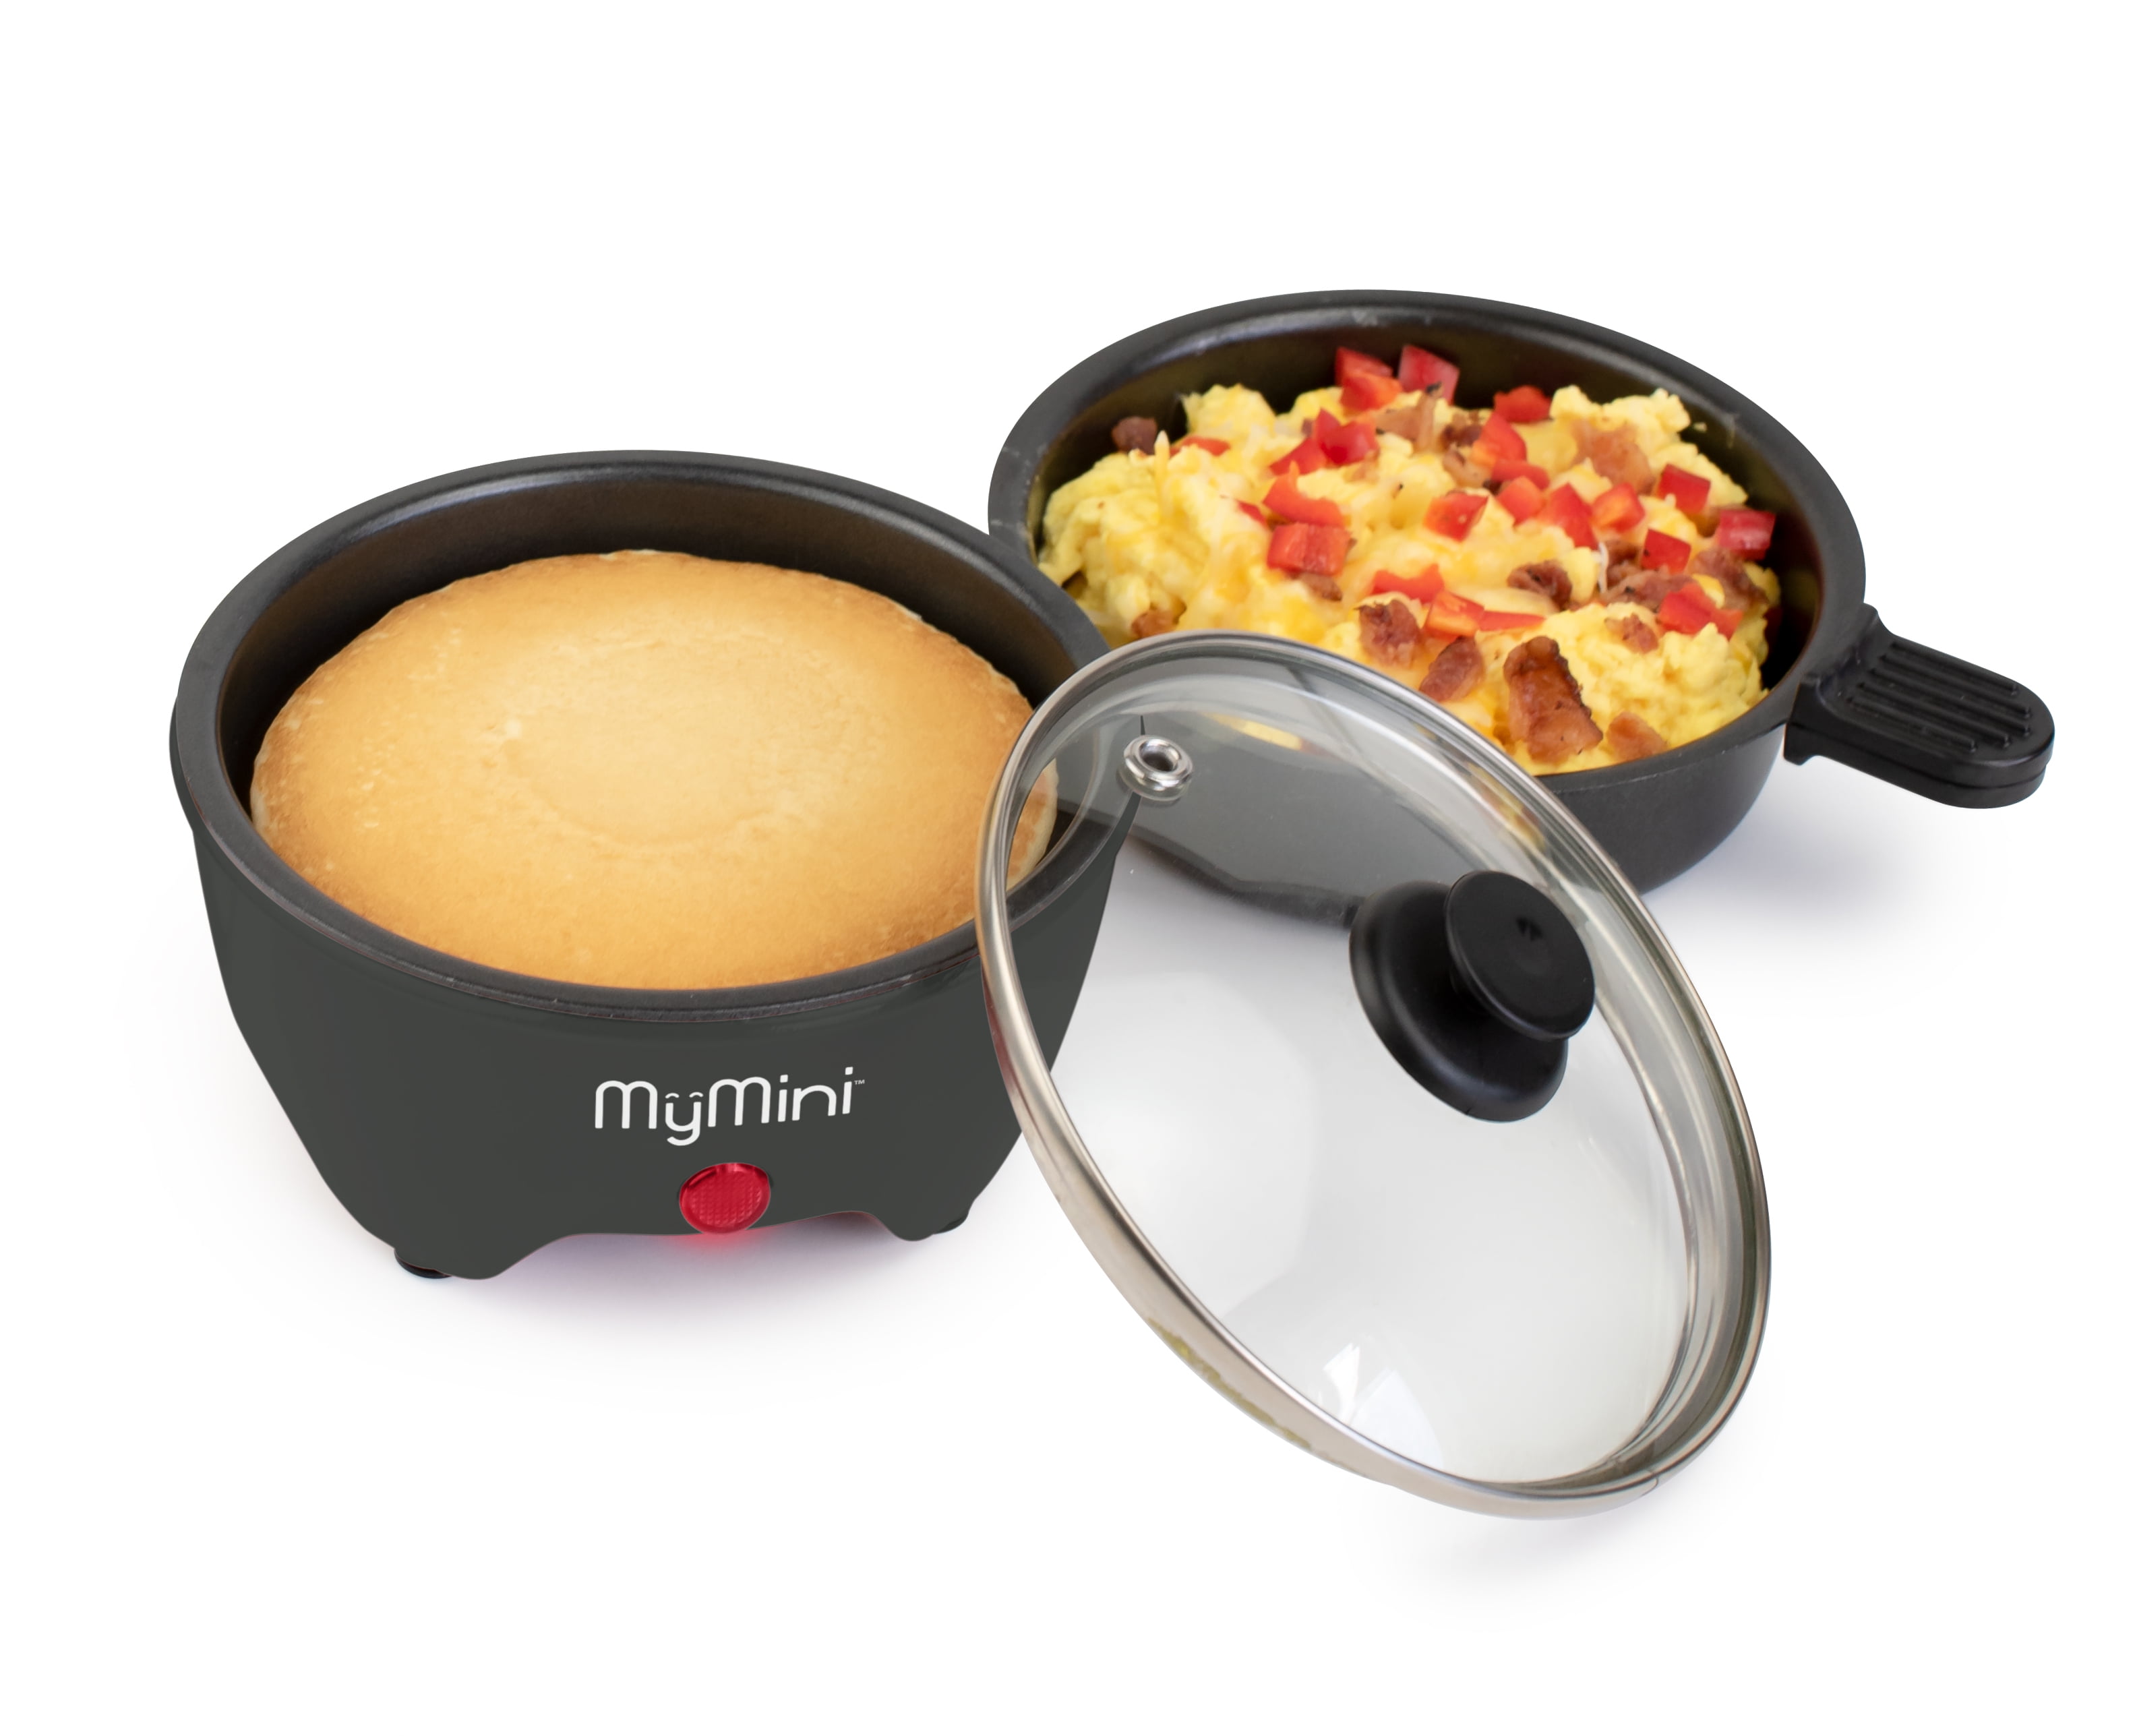 MyMini NMSKWM7GRY Electric Skillet, 7 inch, Gray